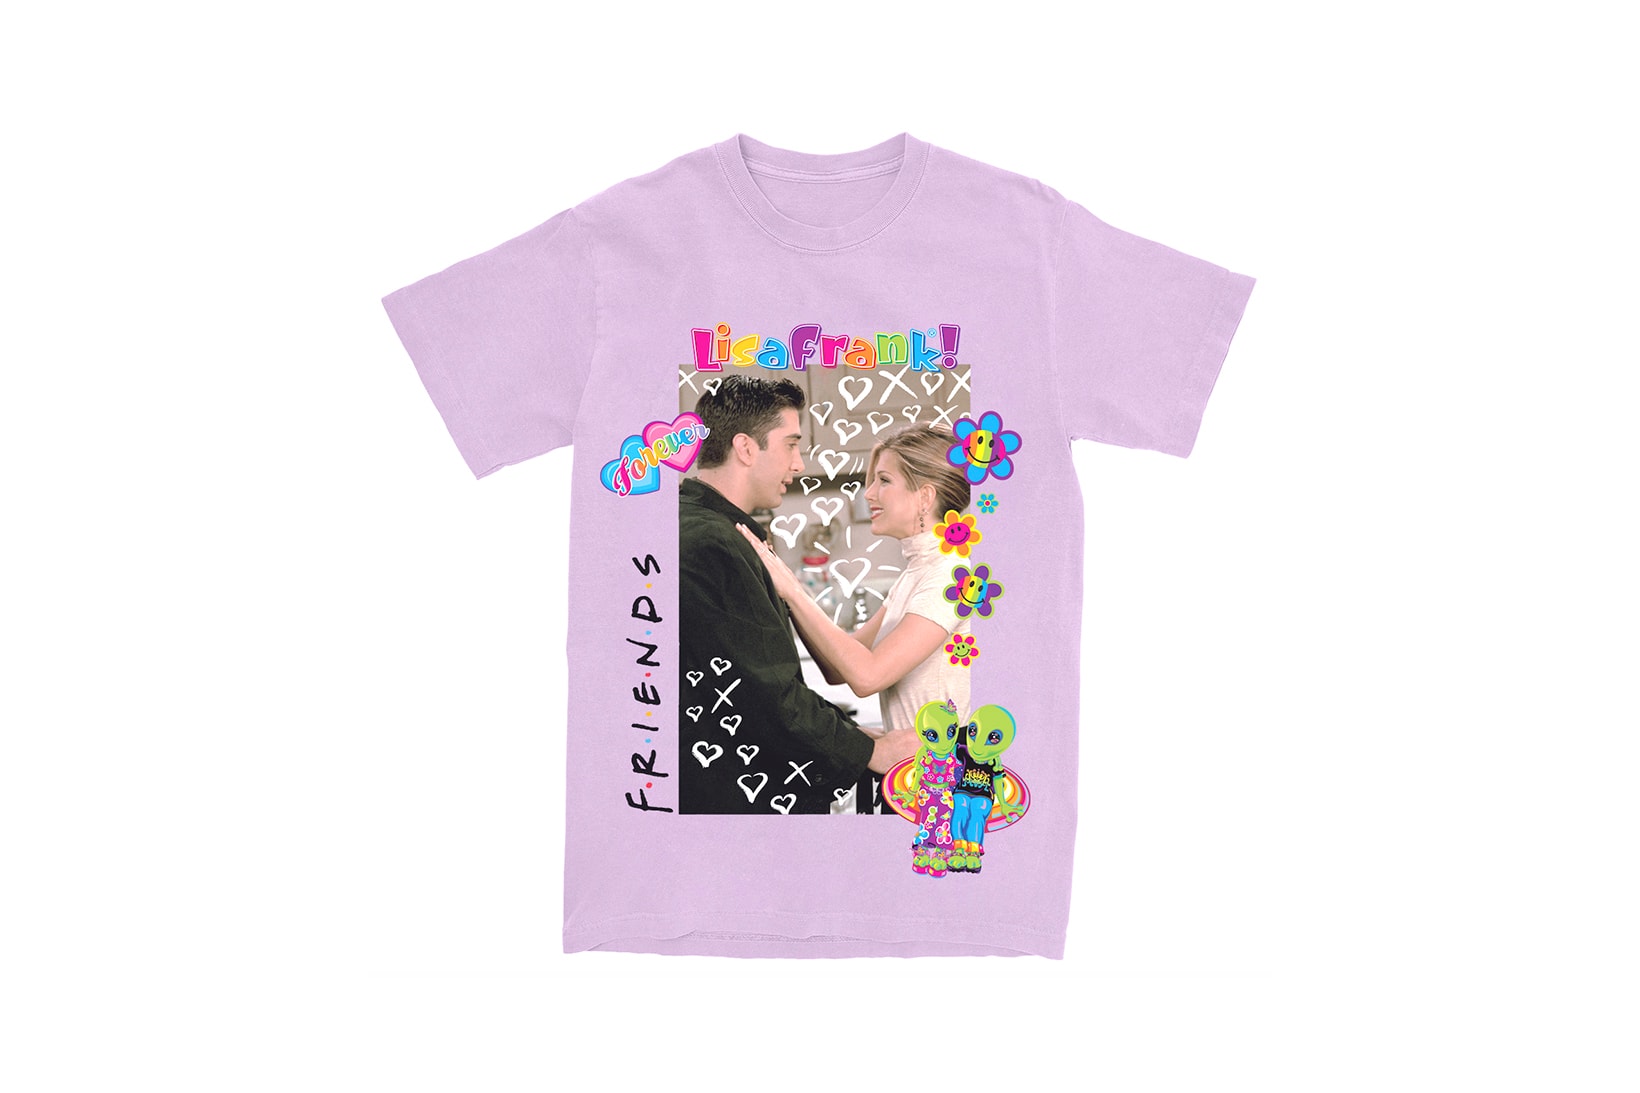 Lisa Frank x Friends TV Show Clothing Collaboration Collection T-Shirt Black